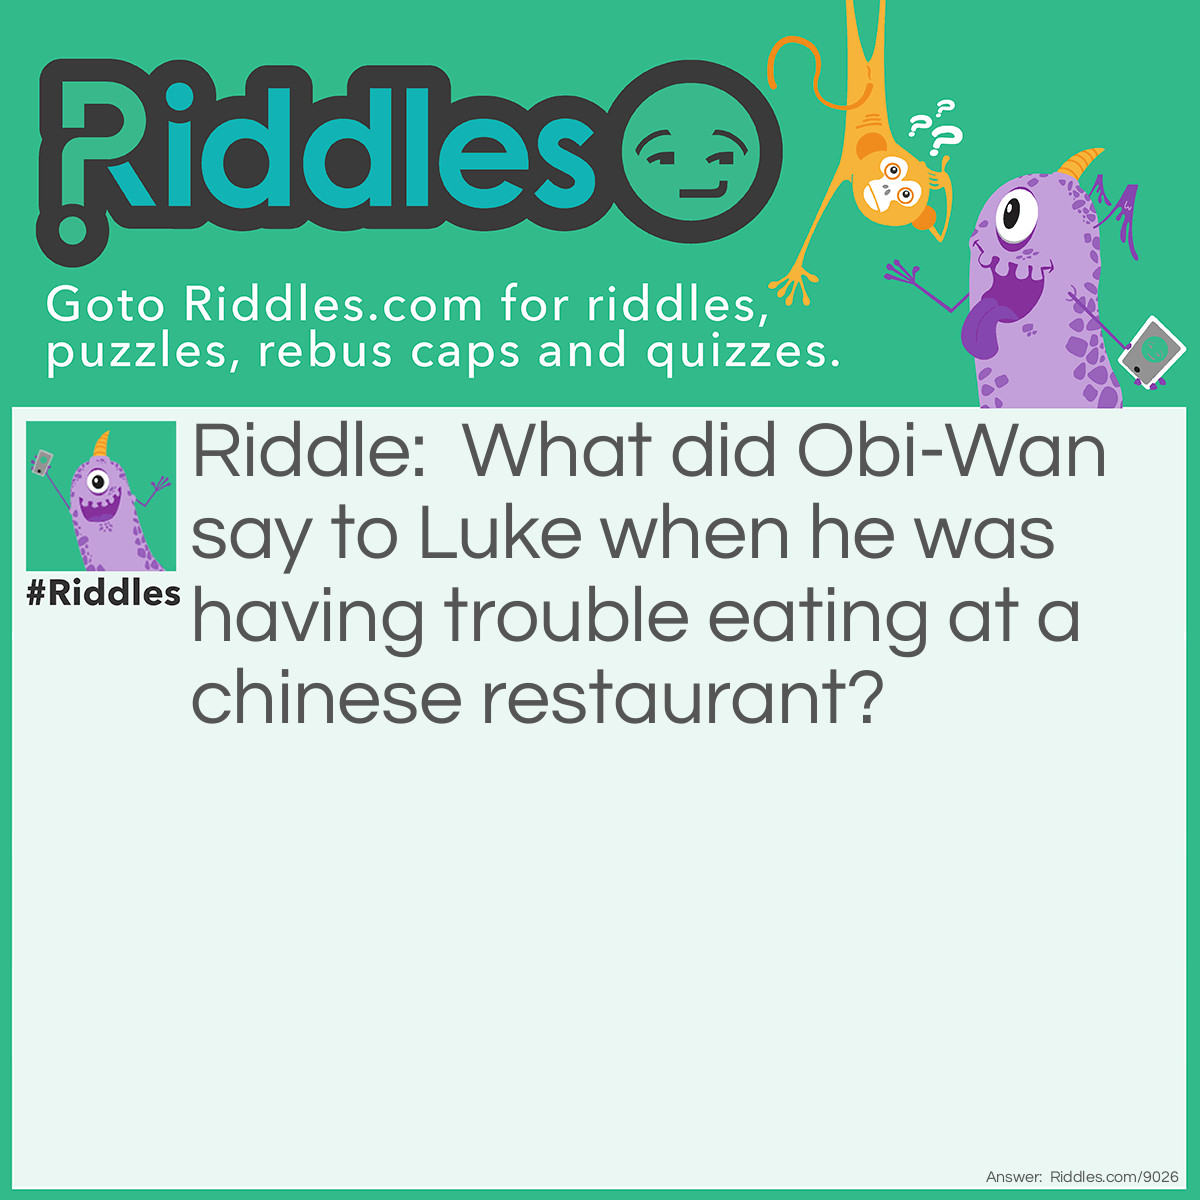 Riddle: What did Obi-Wan say to Luke when he was having trouble eating at a chinese restaurant? Answer: Use the fork, Luke.